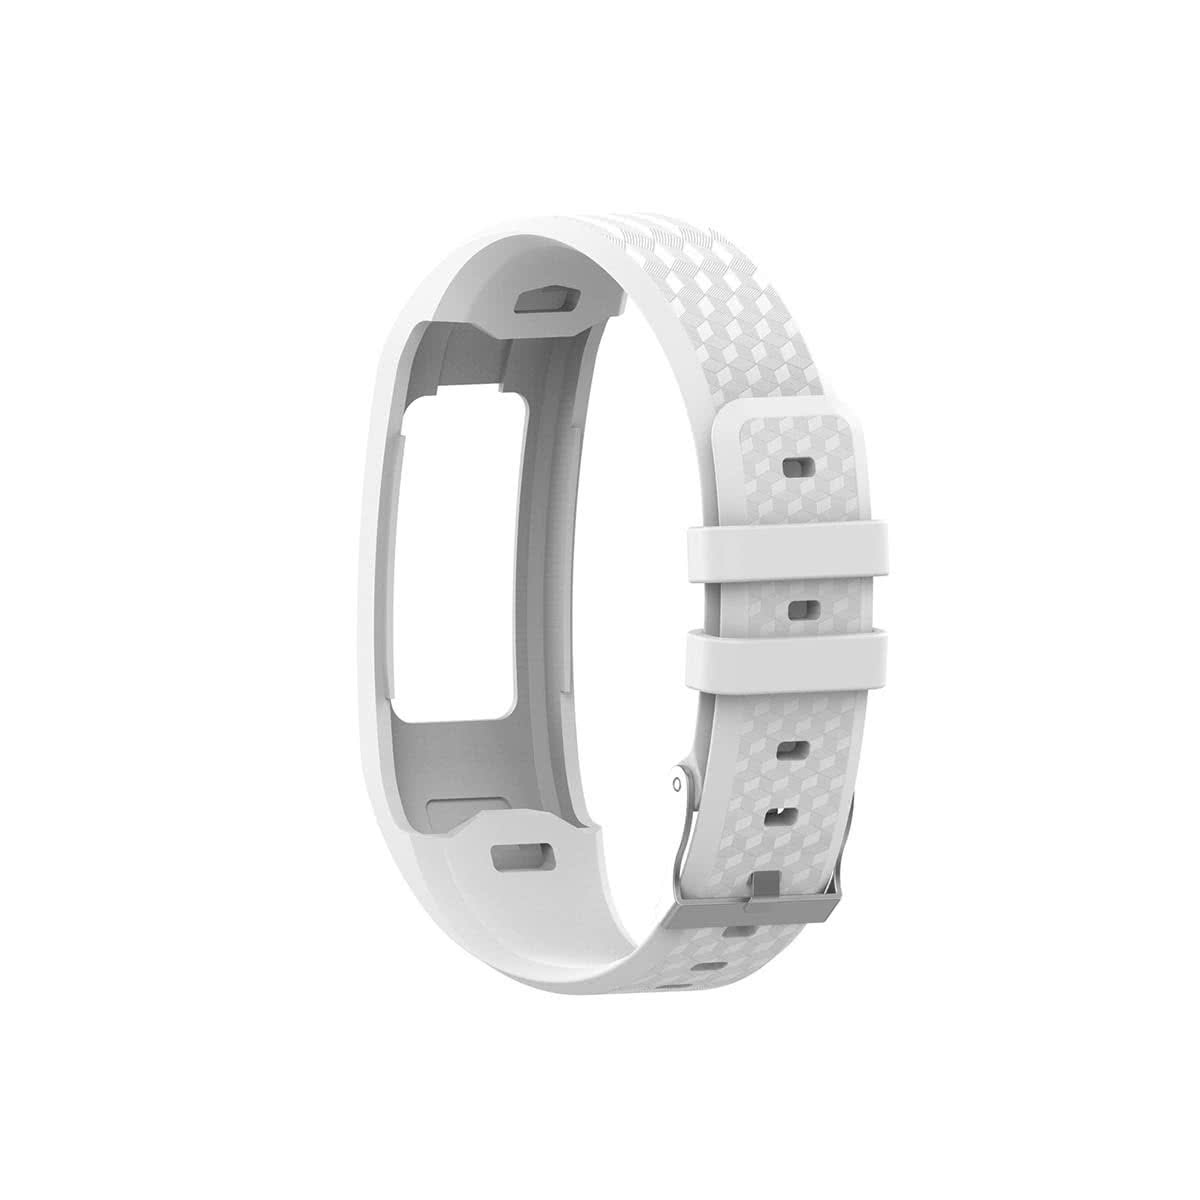 Secure Garmin Vivofit 1 & 2 Band Replacement Strap with Buckle Small White 